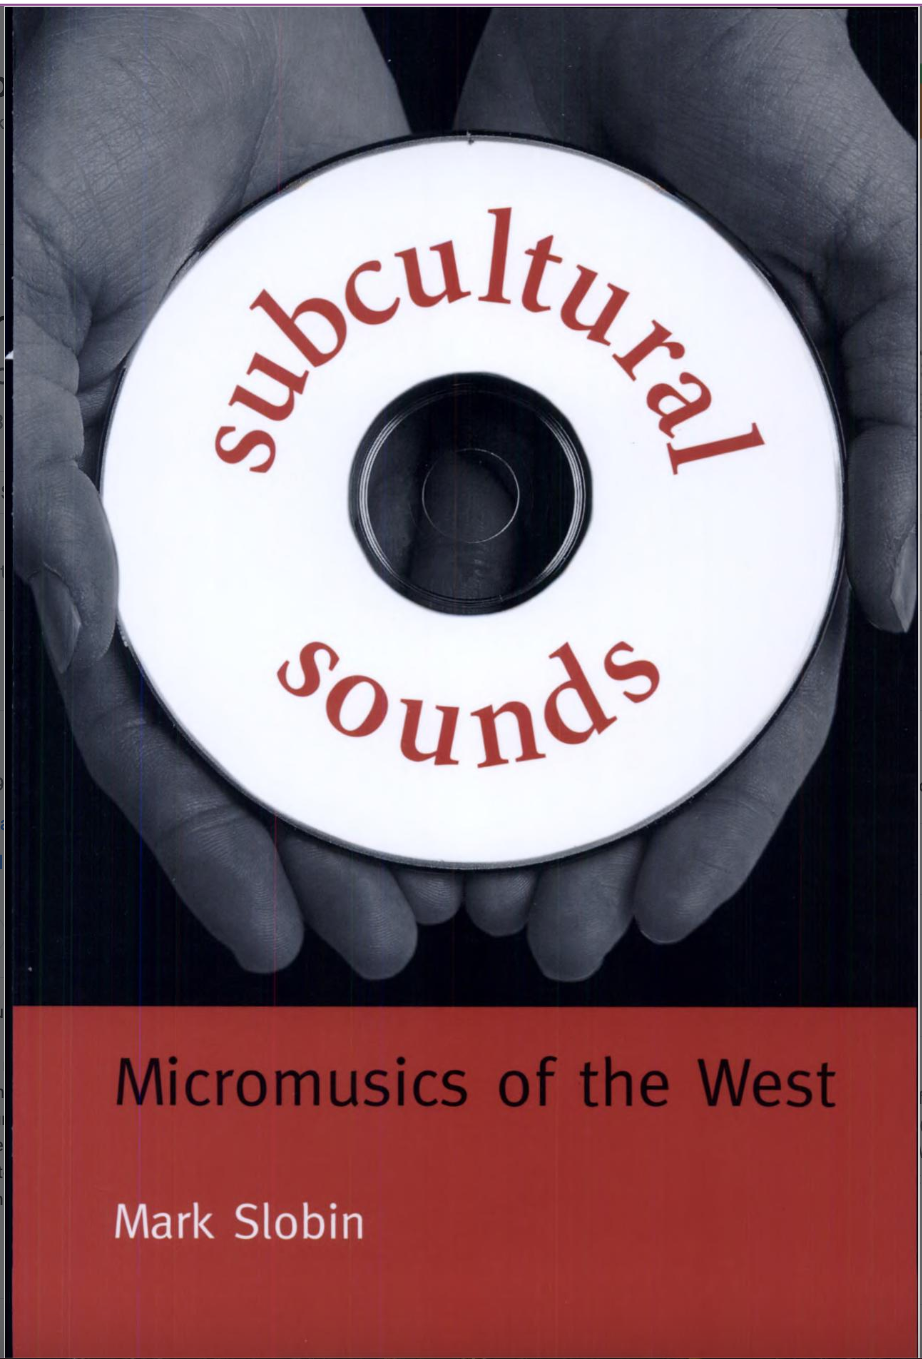 Slobin, Mark. Subcultural Sounds : Micromusics of the West. Hanover, NH: Wesleyan University Press, 1993.